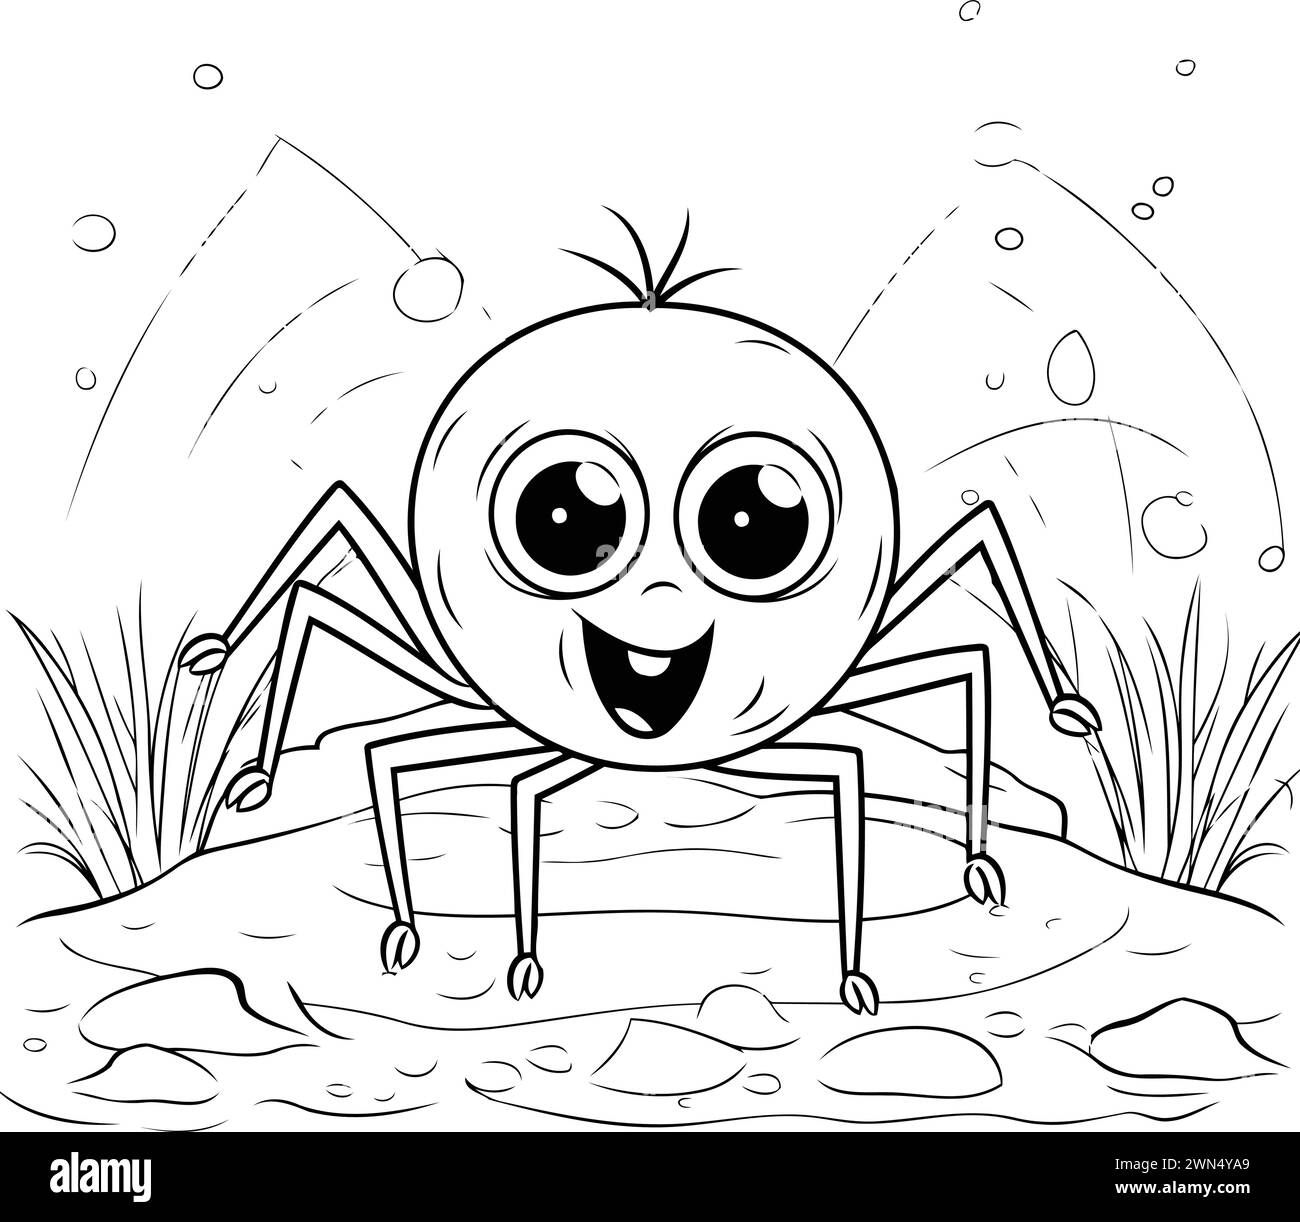 Coloring Page Outline Of cartoon spider. Vector illustration for coloring book. Stock Vector